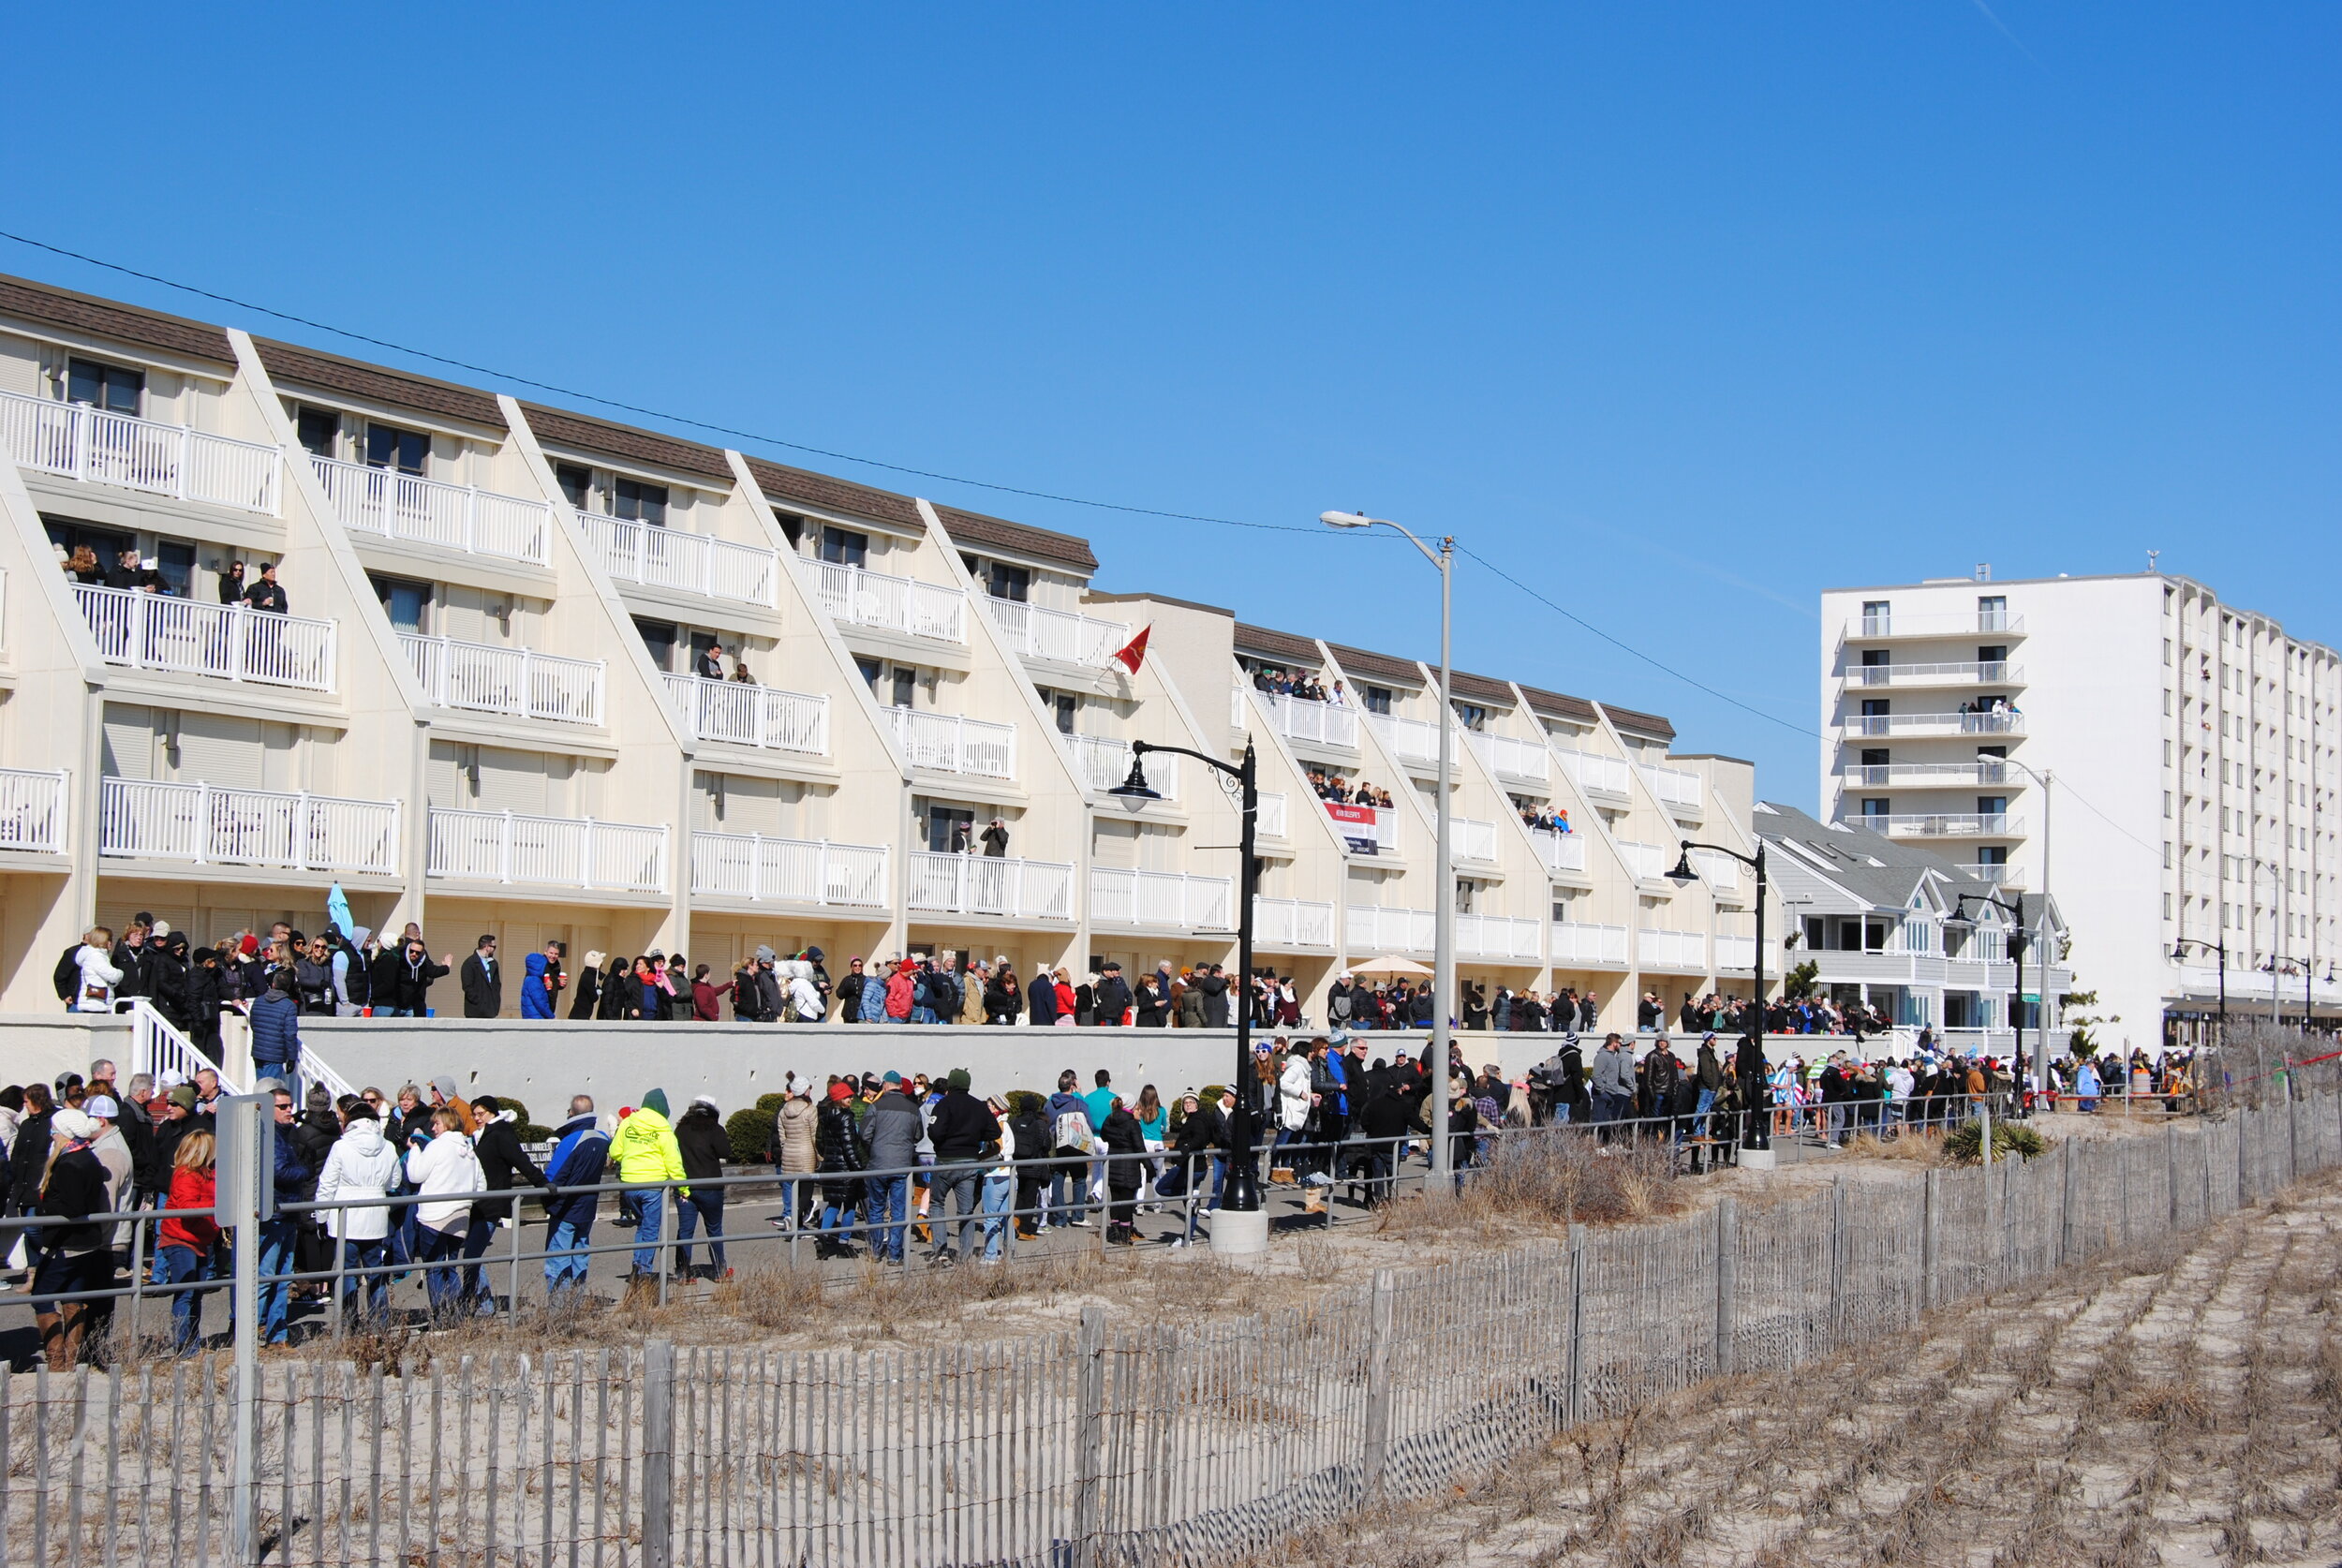 Spectators lined the Promenade to watch the 2020 plunge.  